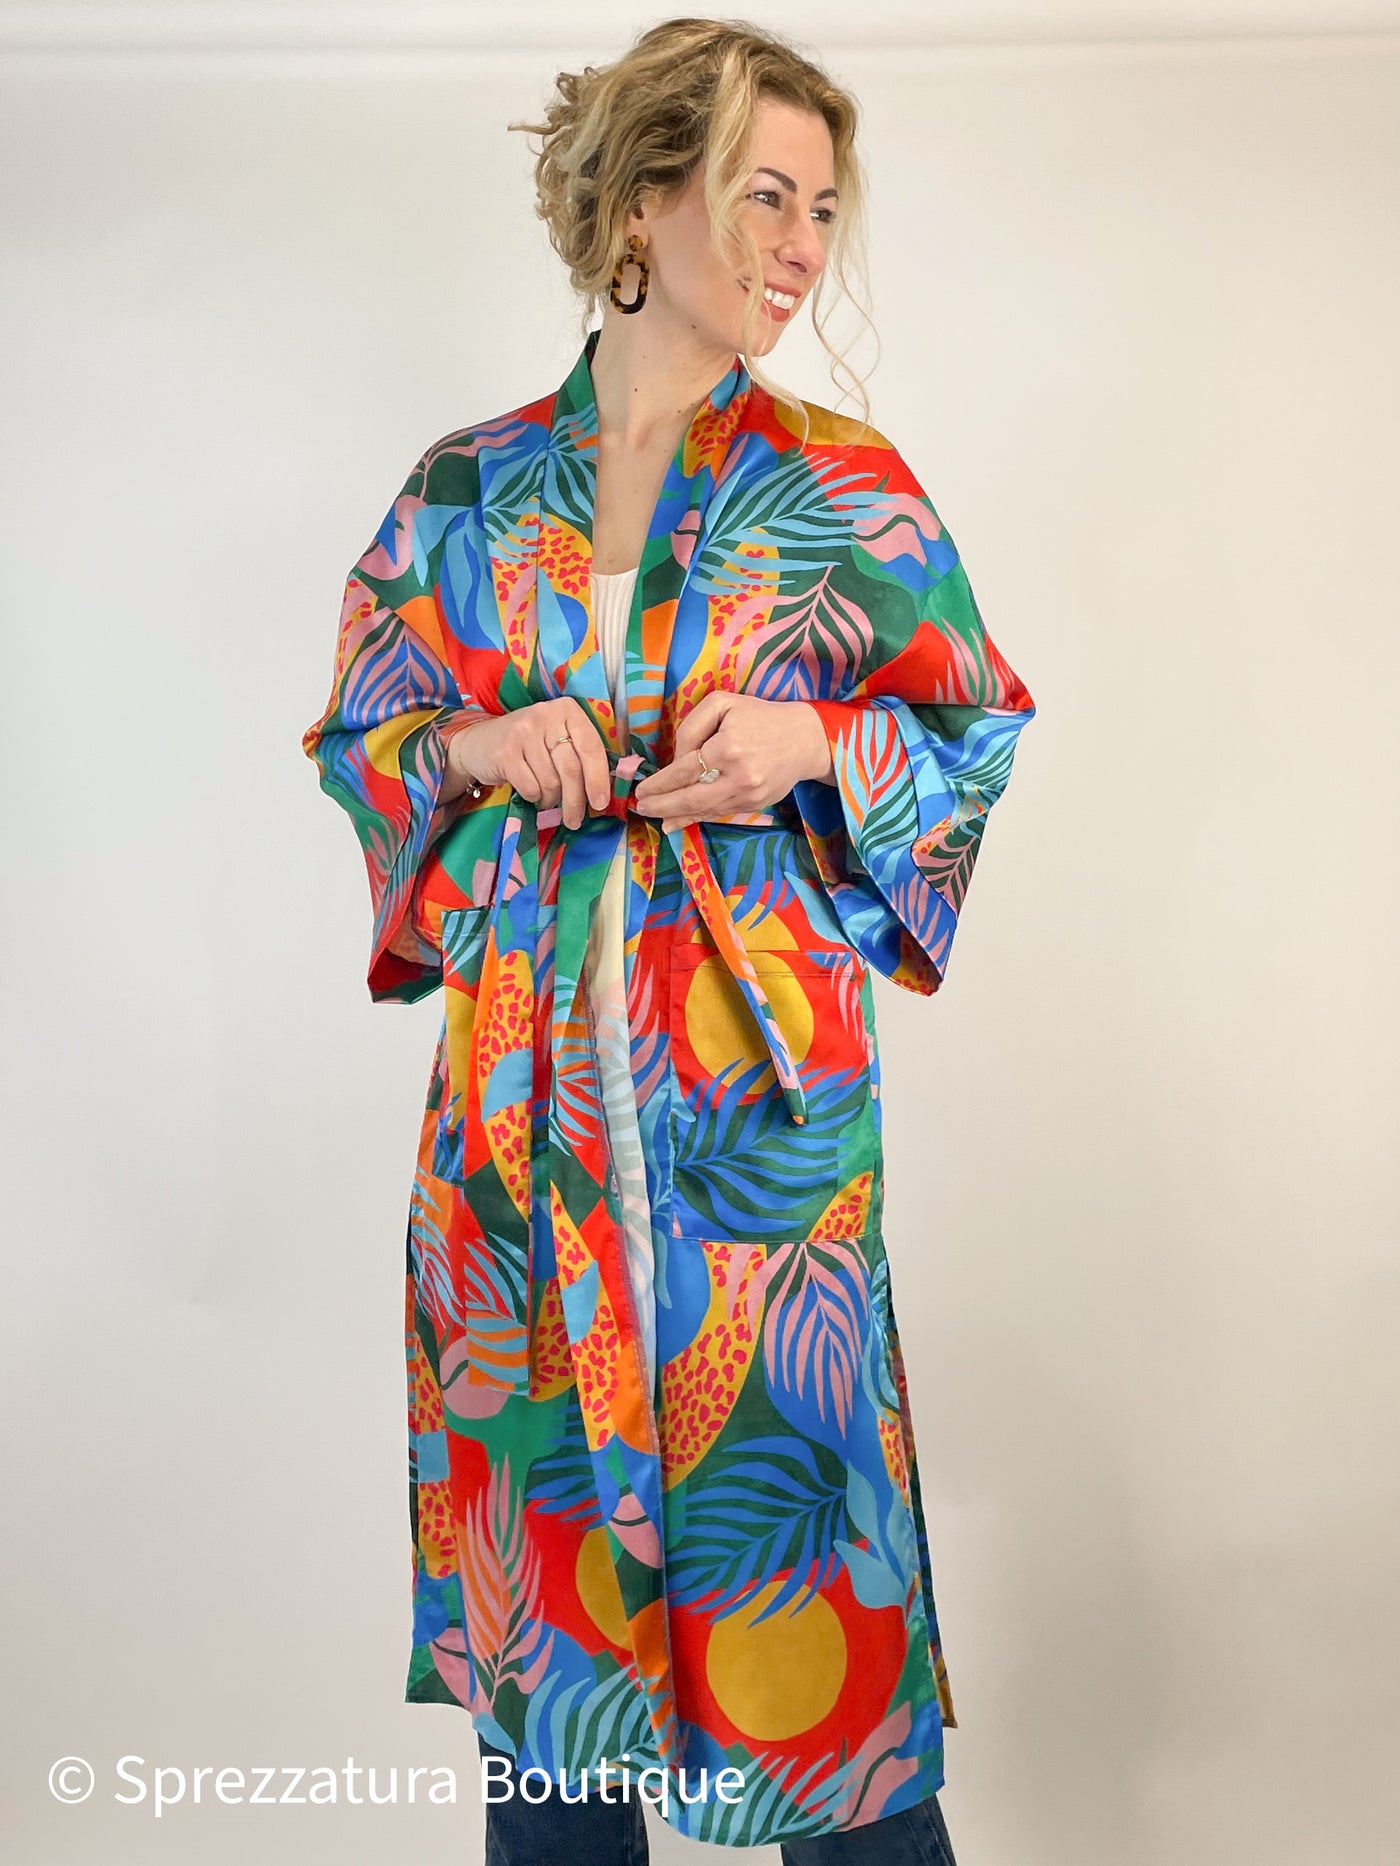 Women's kimono robe tropical bright colorful chic travel vacation layer swim coverup stylish bathing suit beachy robe Modern smart causal female chic effortless outfit womens ladies gift elegant effortless clothing everyday stylish clothes apparel outfits chic winter spring style women’s boutique trendy teacher office cute outfit boutique clothes fashion quality work from home lounge  gift for her midsize 